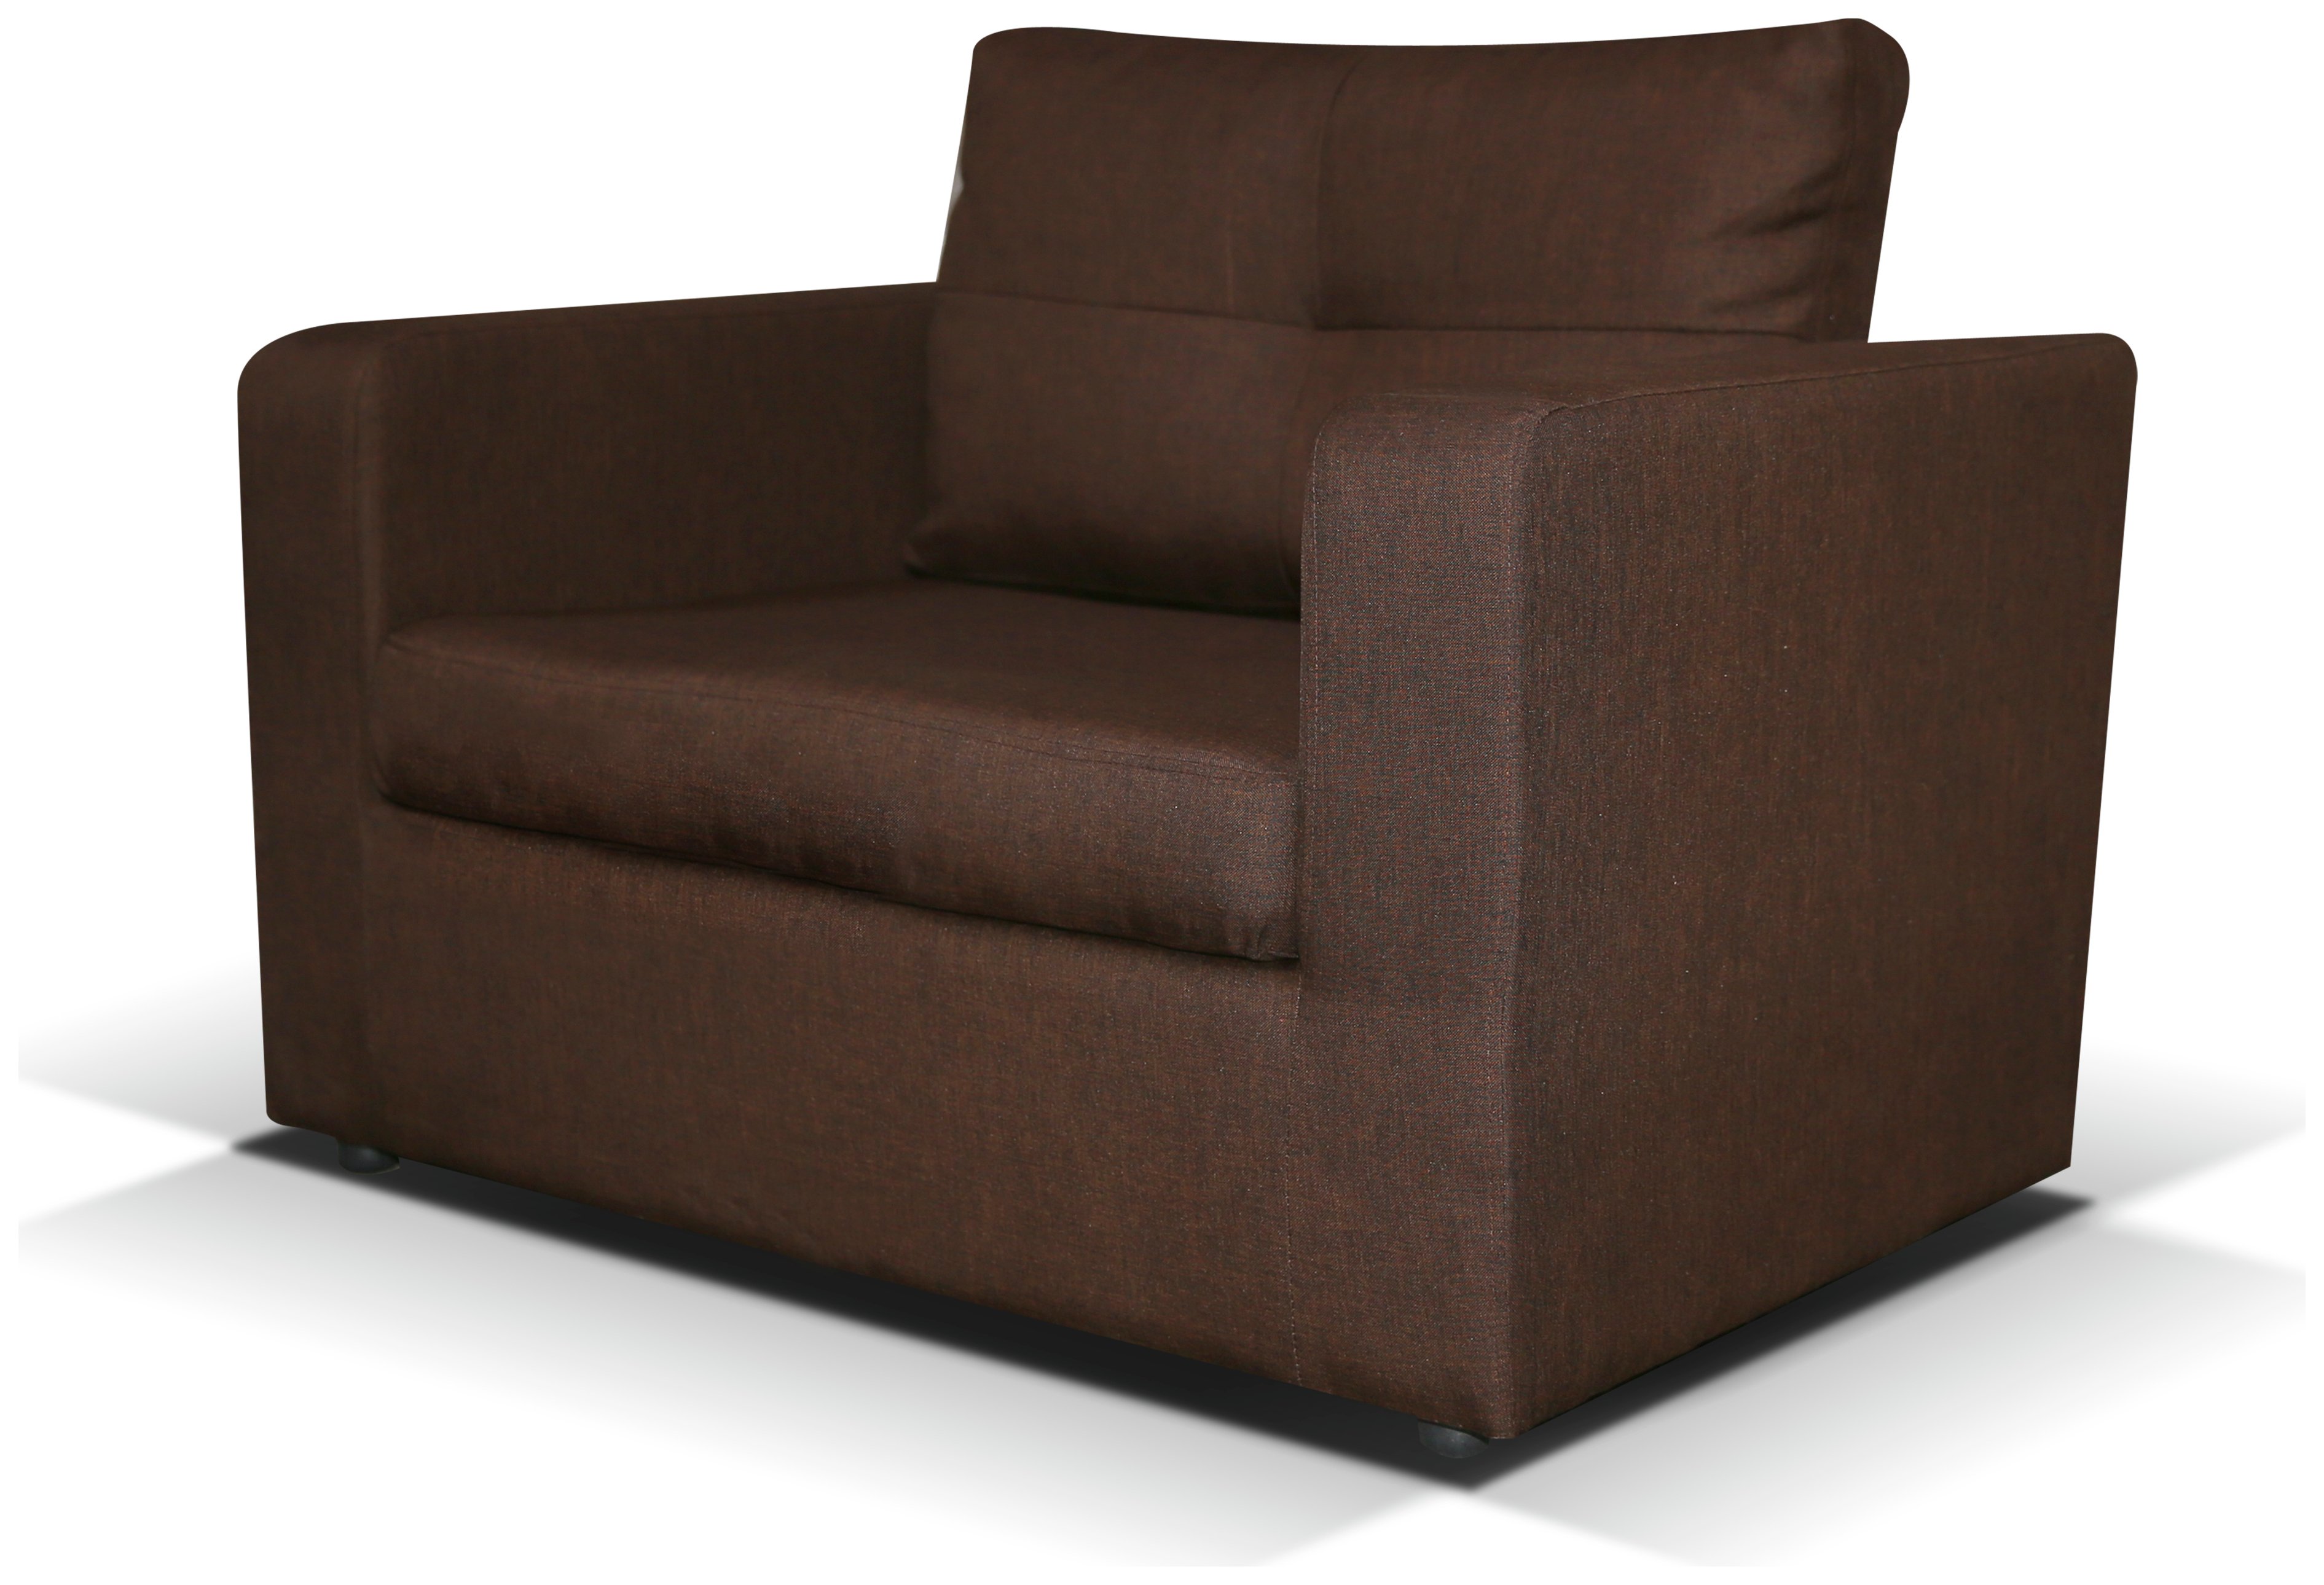 Buy Argos Home Max Single Fabric Chairbed - Chocolate | Sofa beds